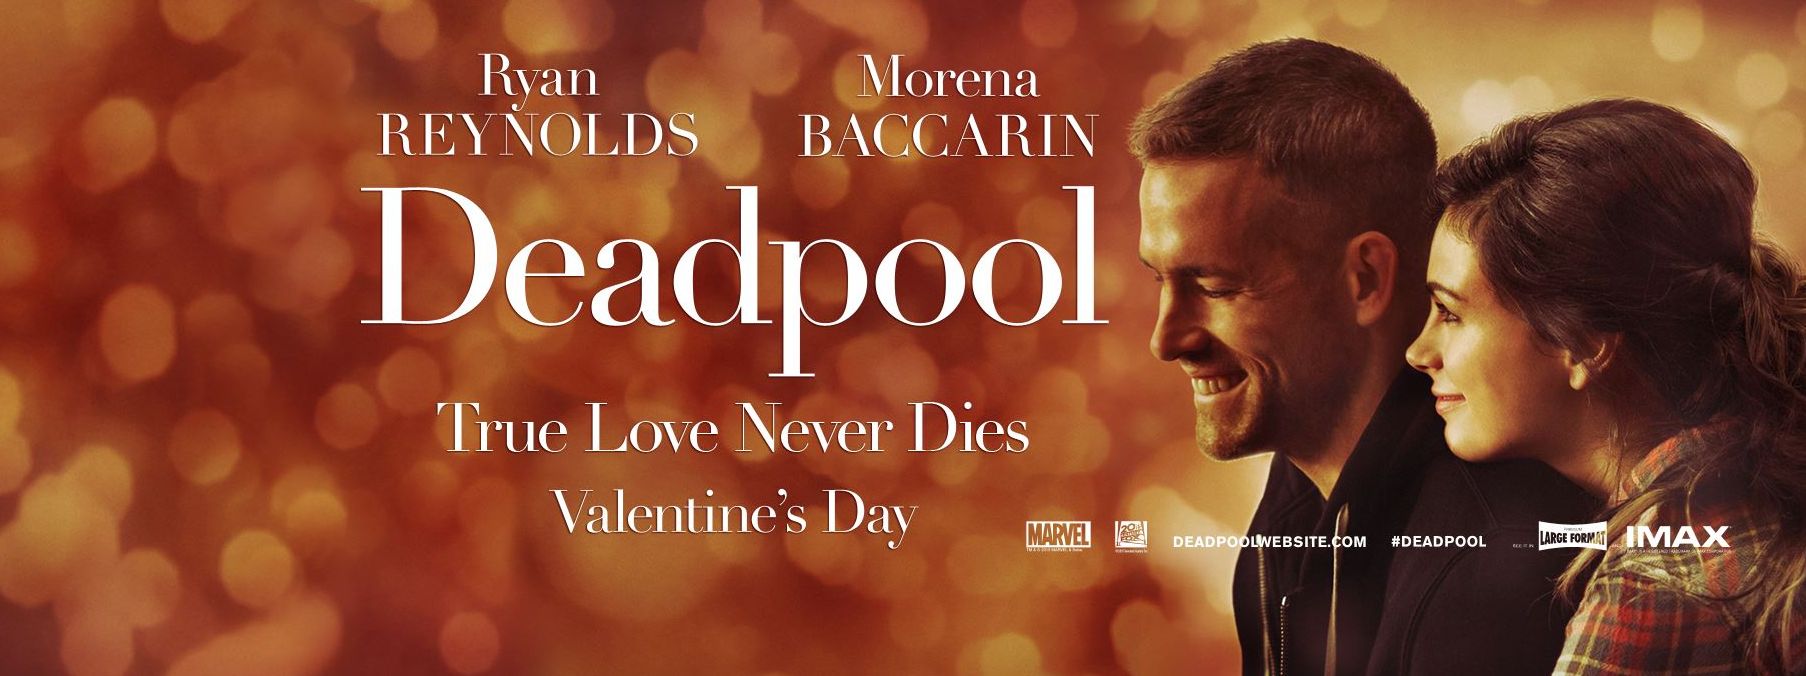 Get ready for the Valentines Day love story, Deadpool. The f